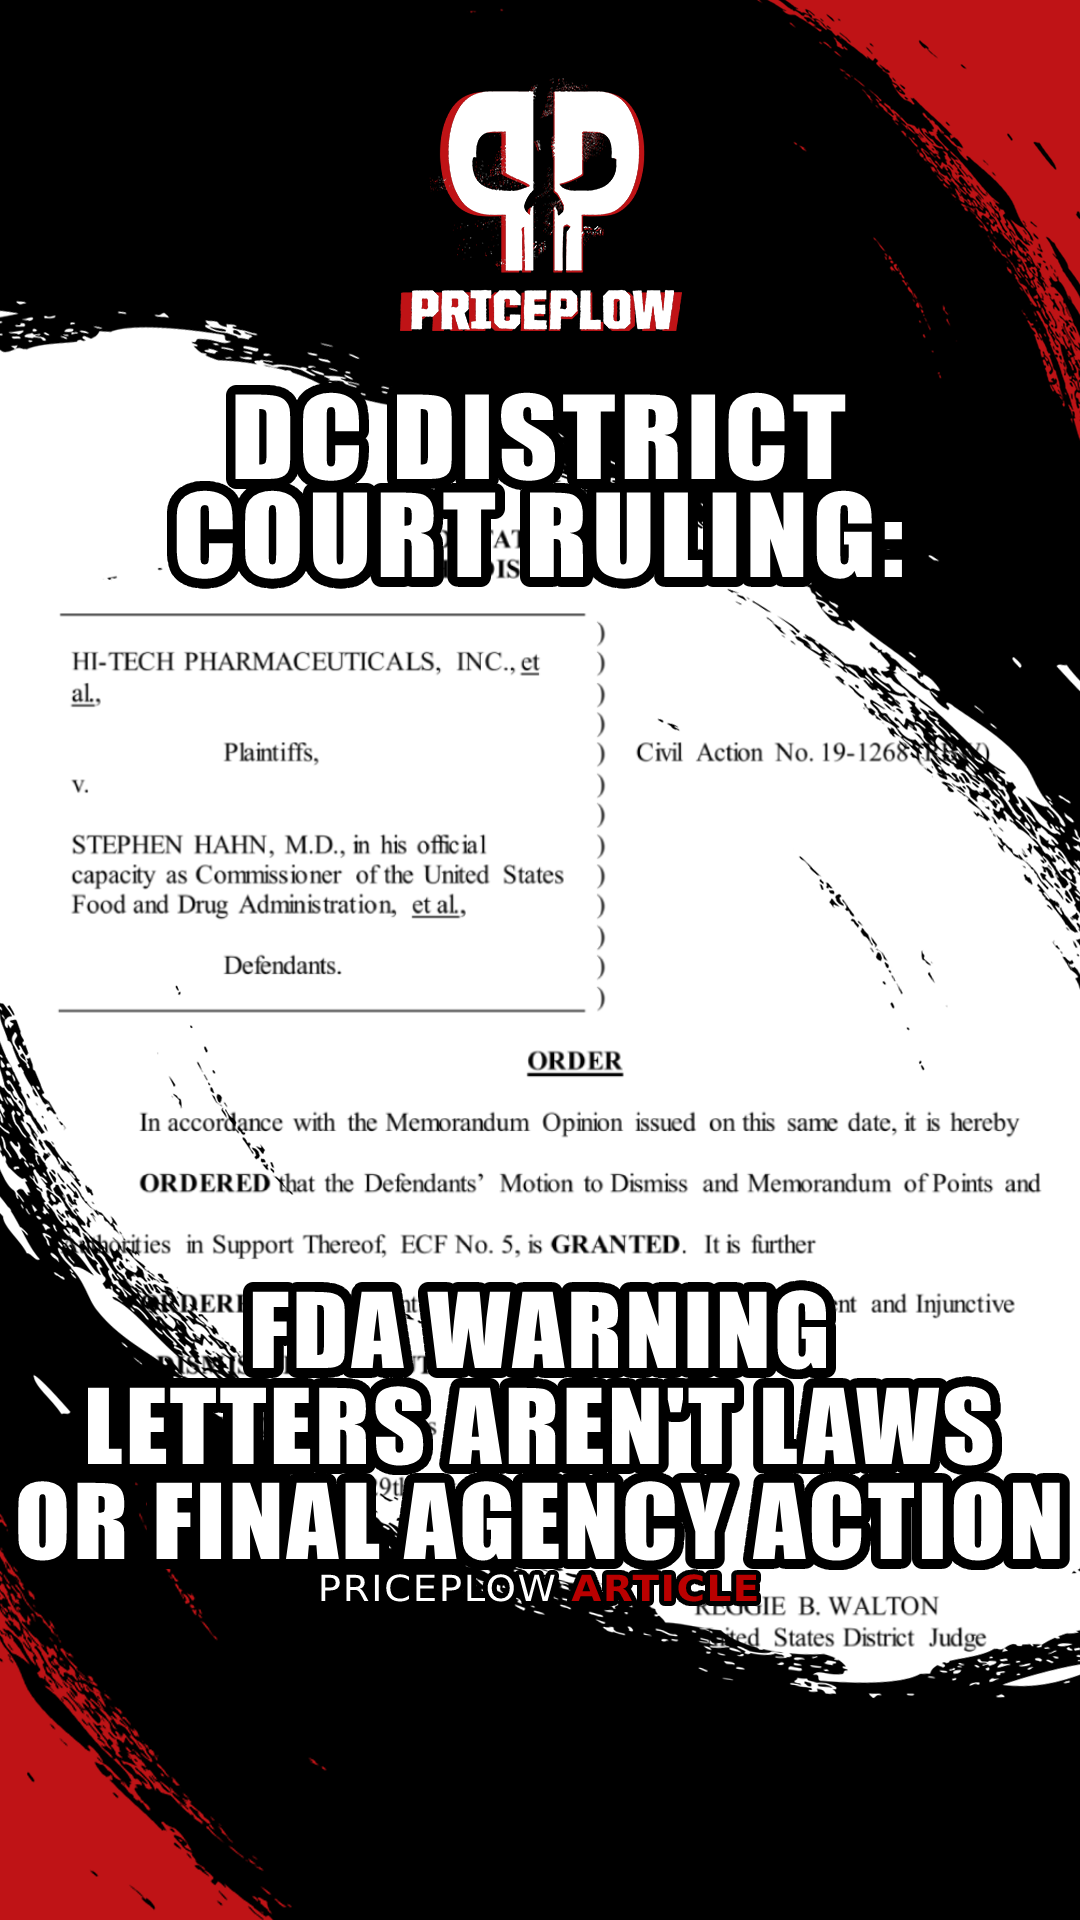 FDA Warning Letters Are Not Final Agency Action